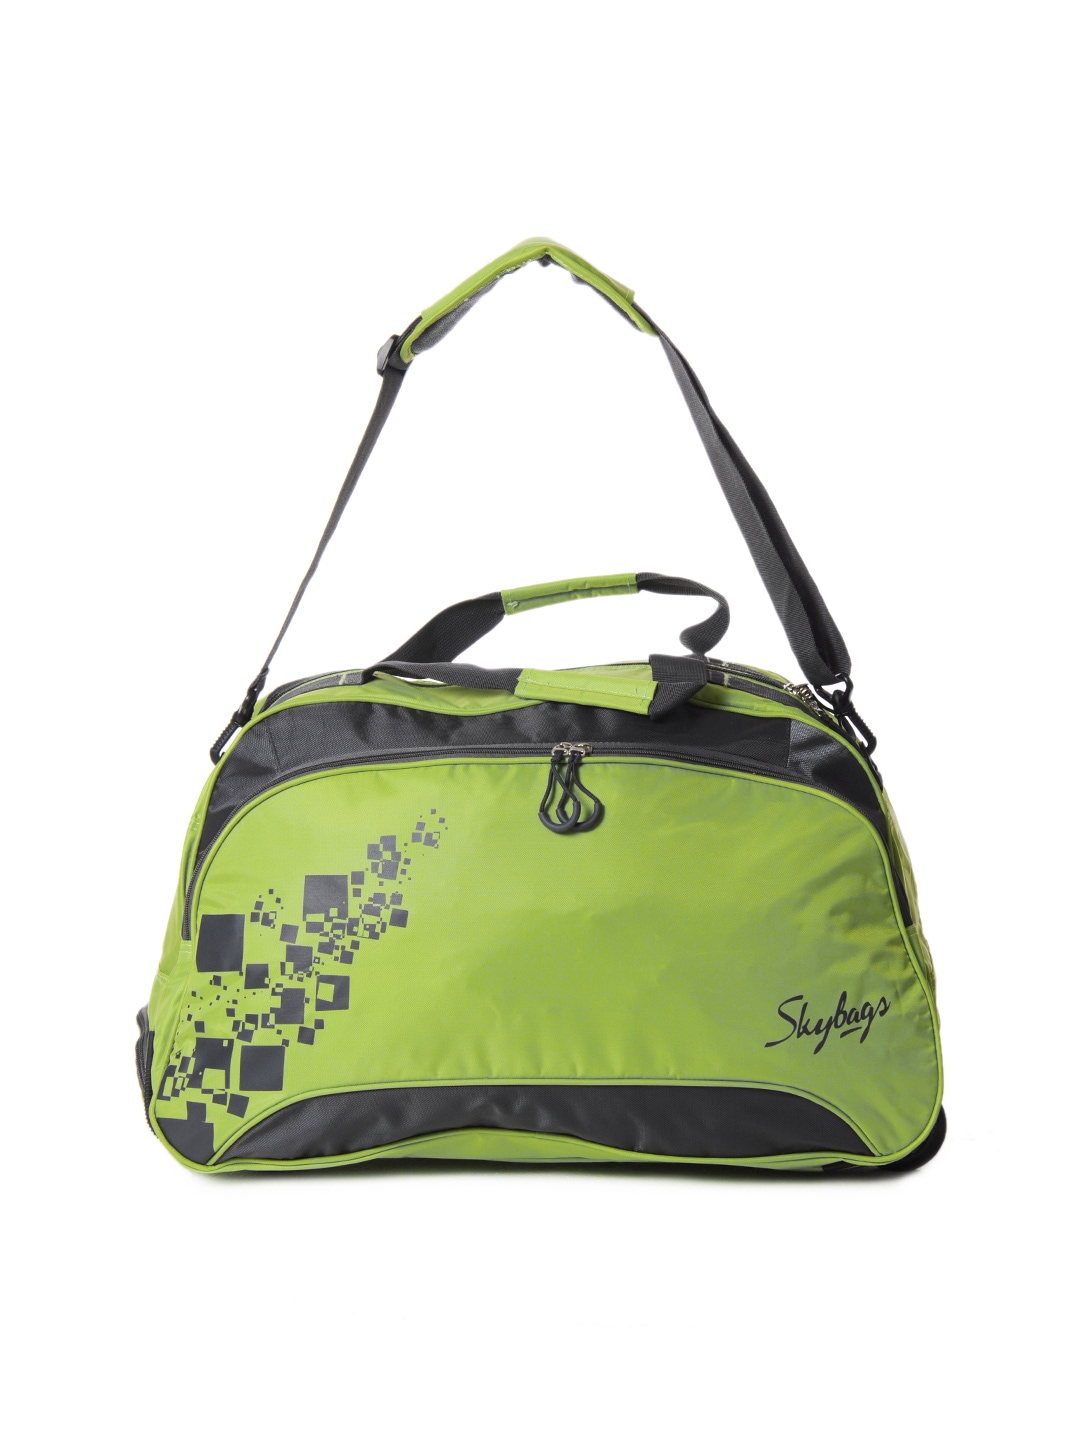 Skybags Unisex Green Duffle Bag